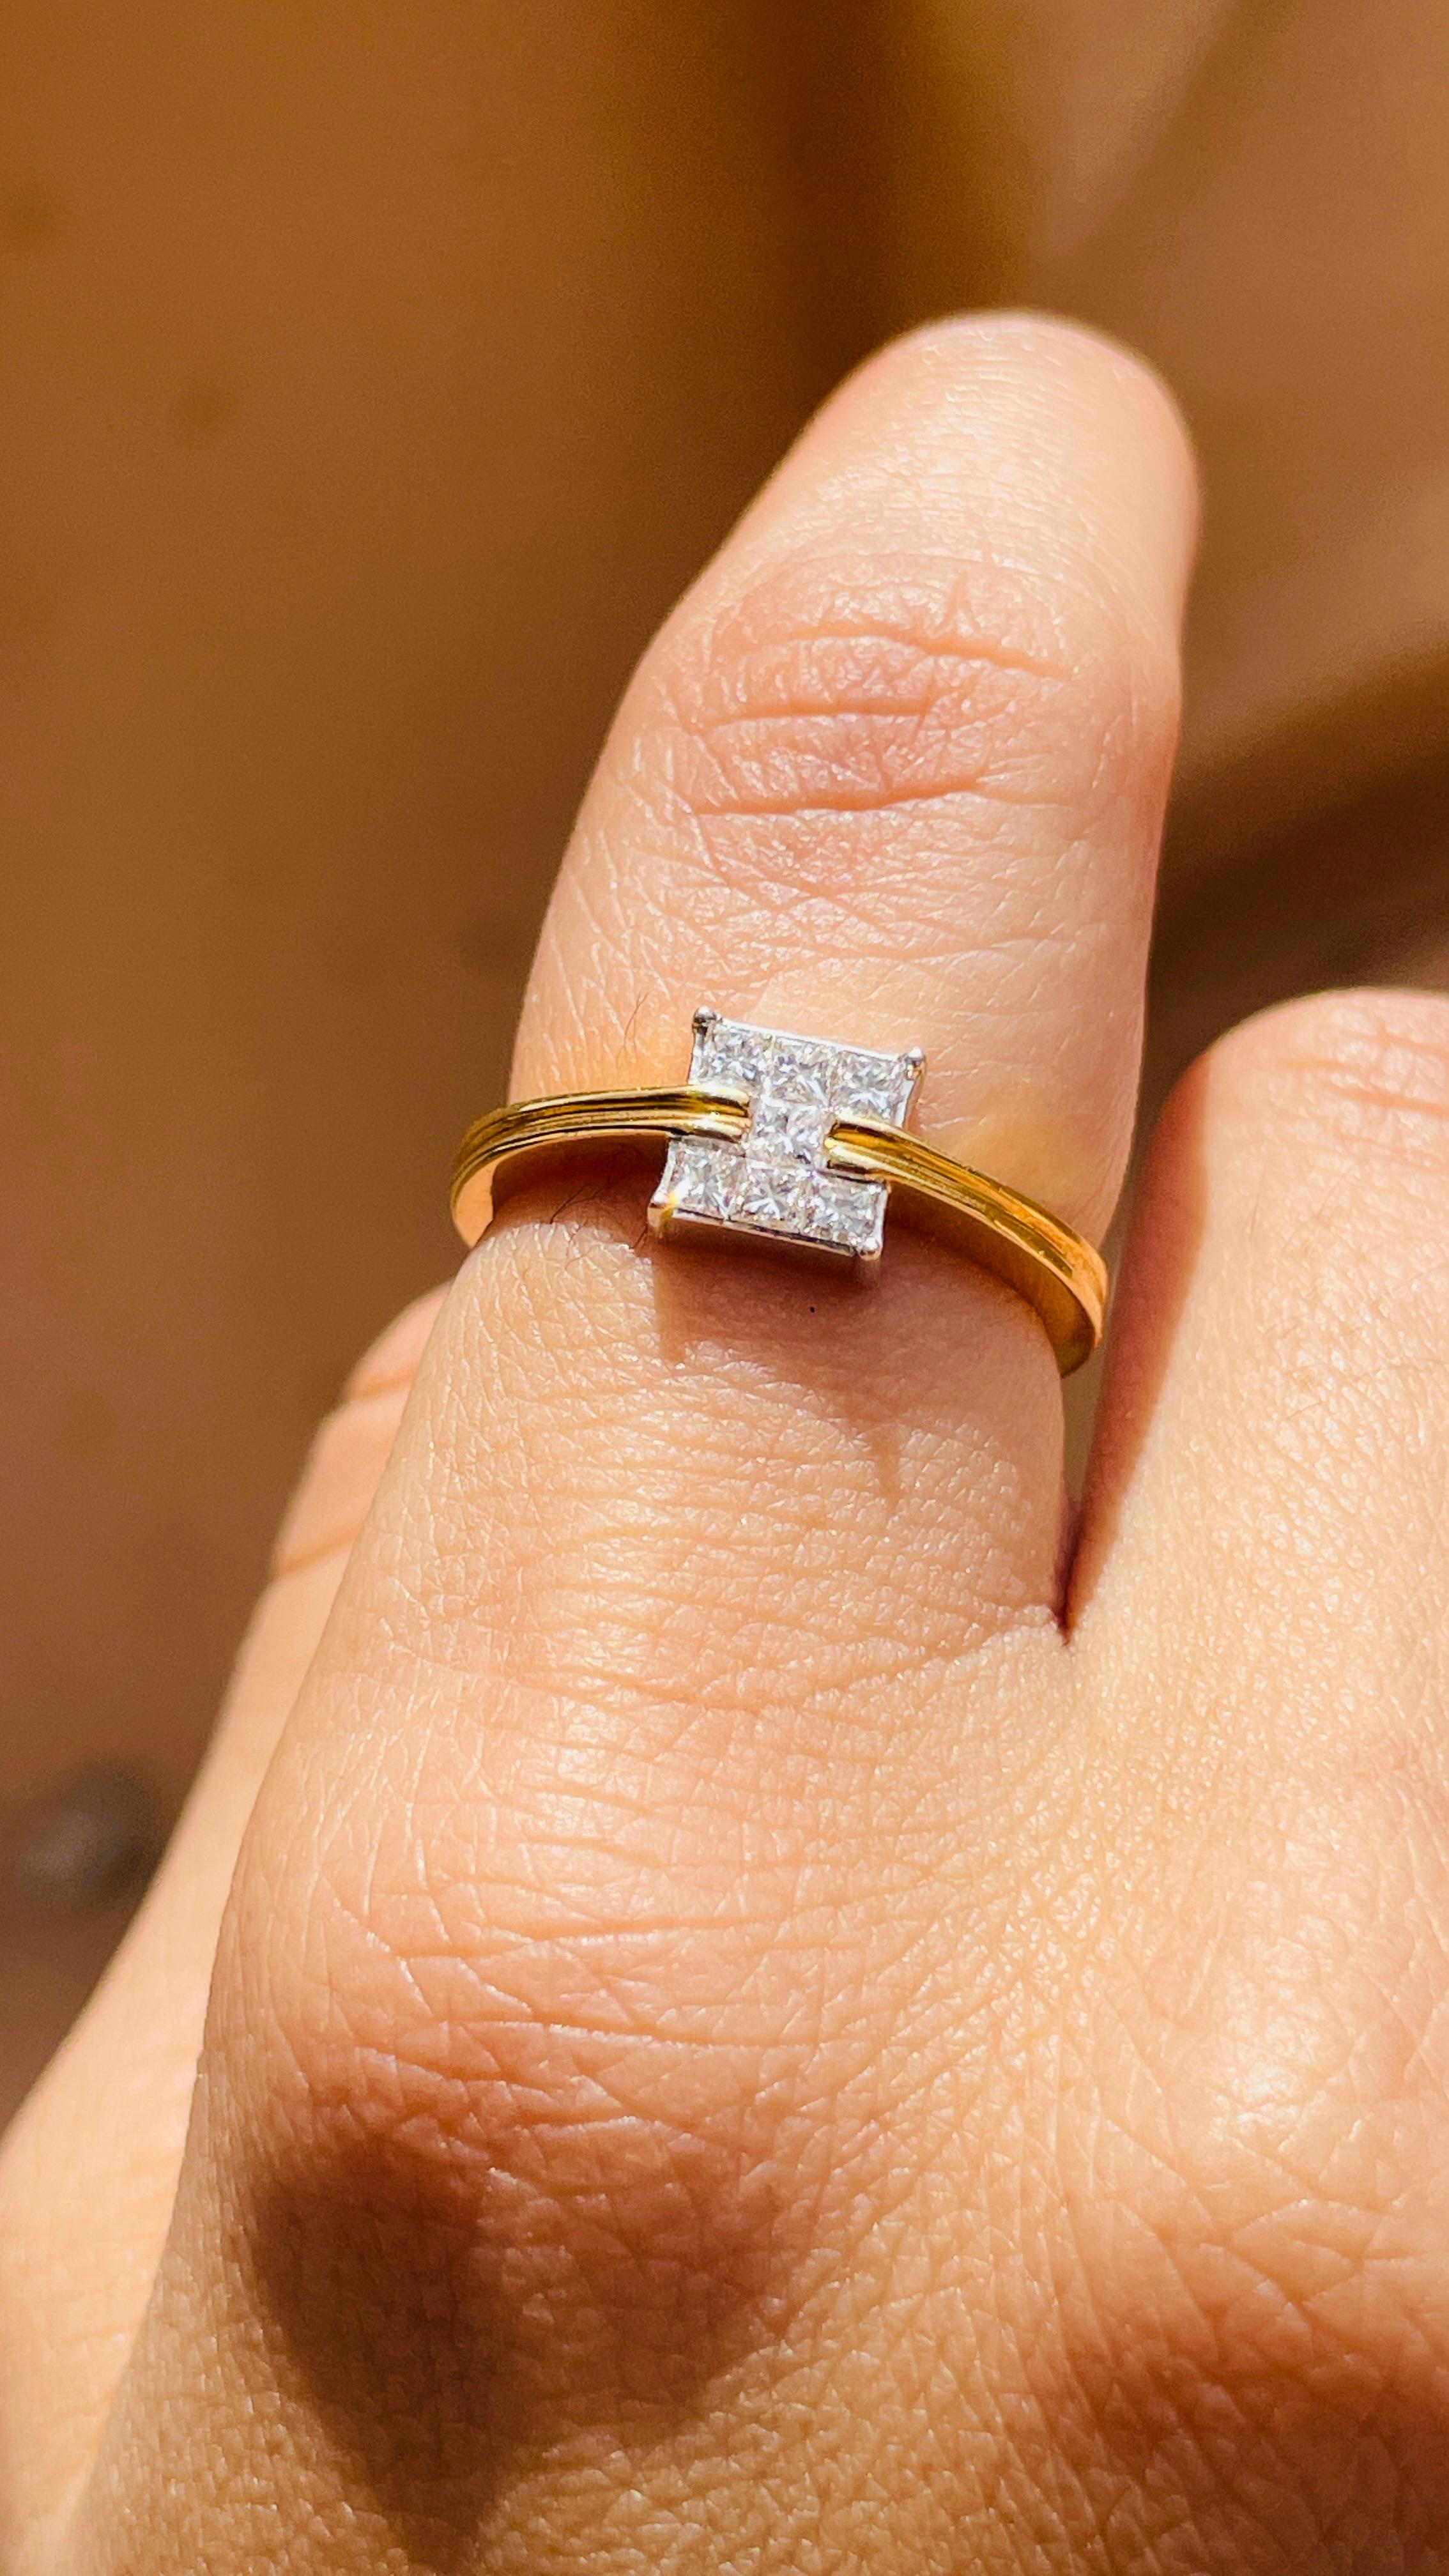 For Sale:  18k Solid Yellow Gold Square Diamond Ring Gift for Her 2